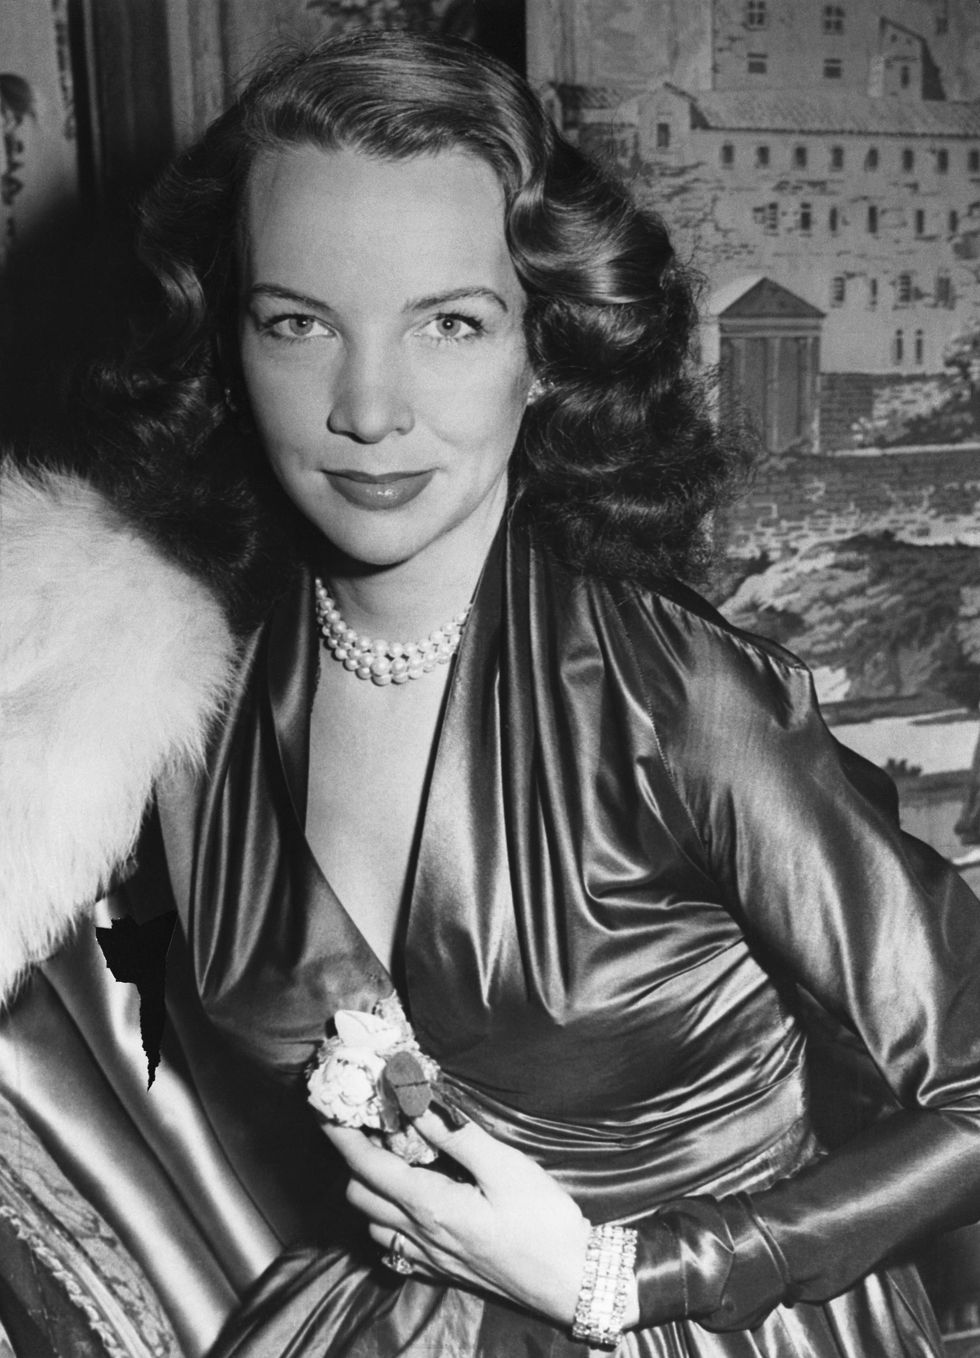 the socialite ann woodward, who was accused of murdering her husband